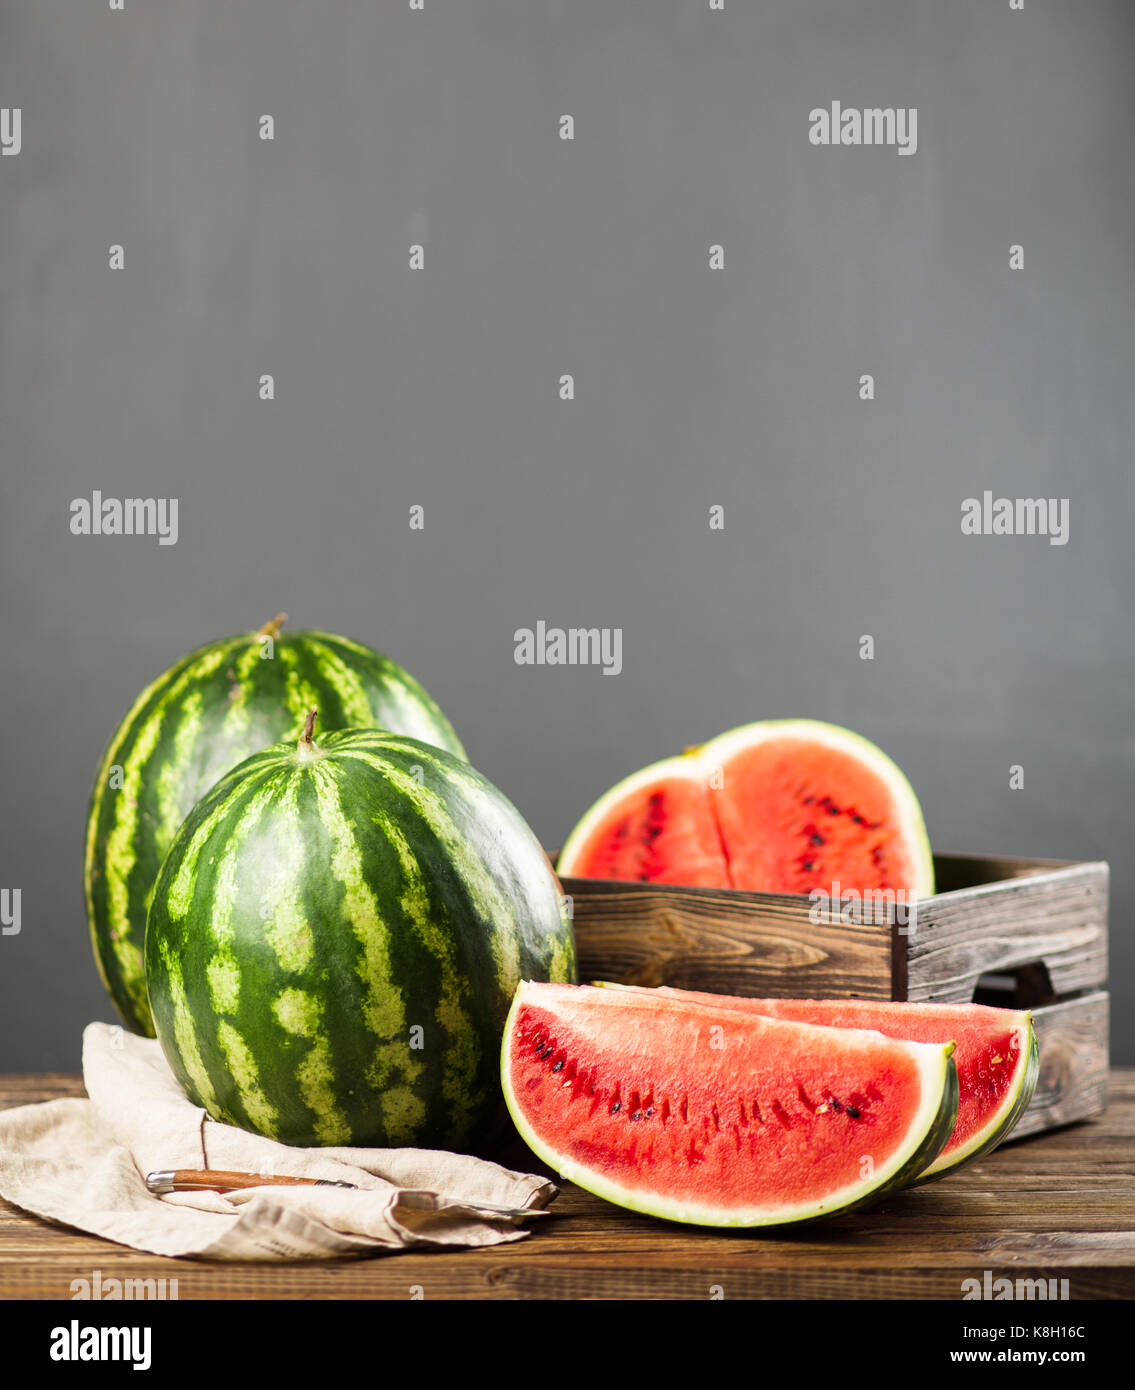 Ripe juicy watermelons on a wooden table Stock Photo